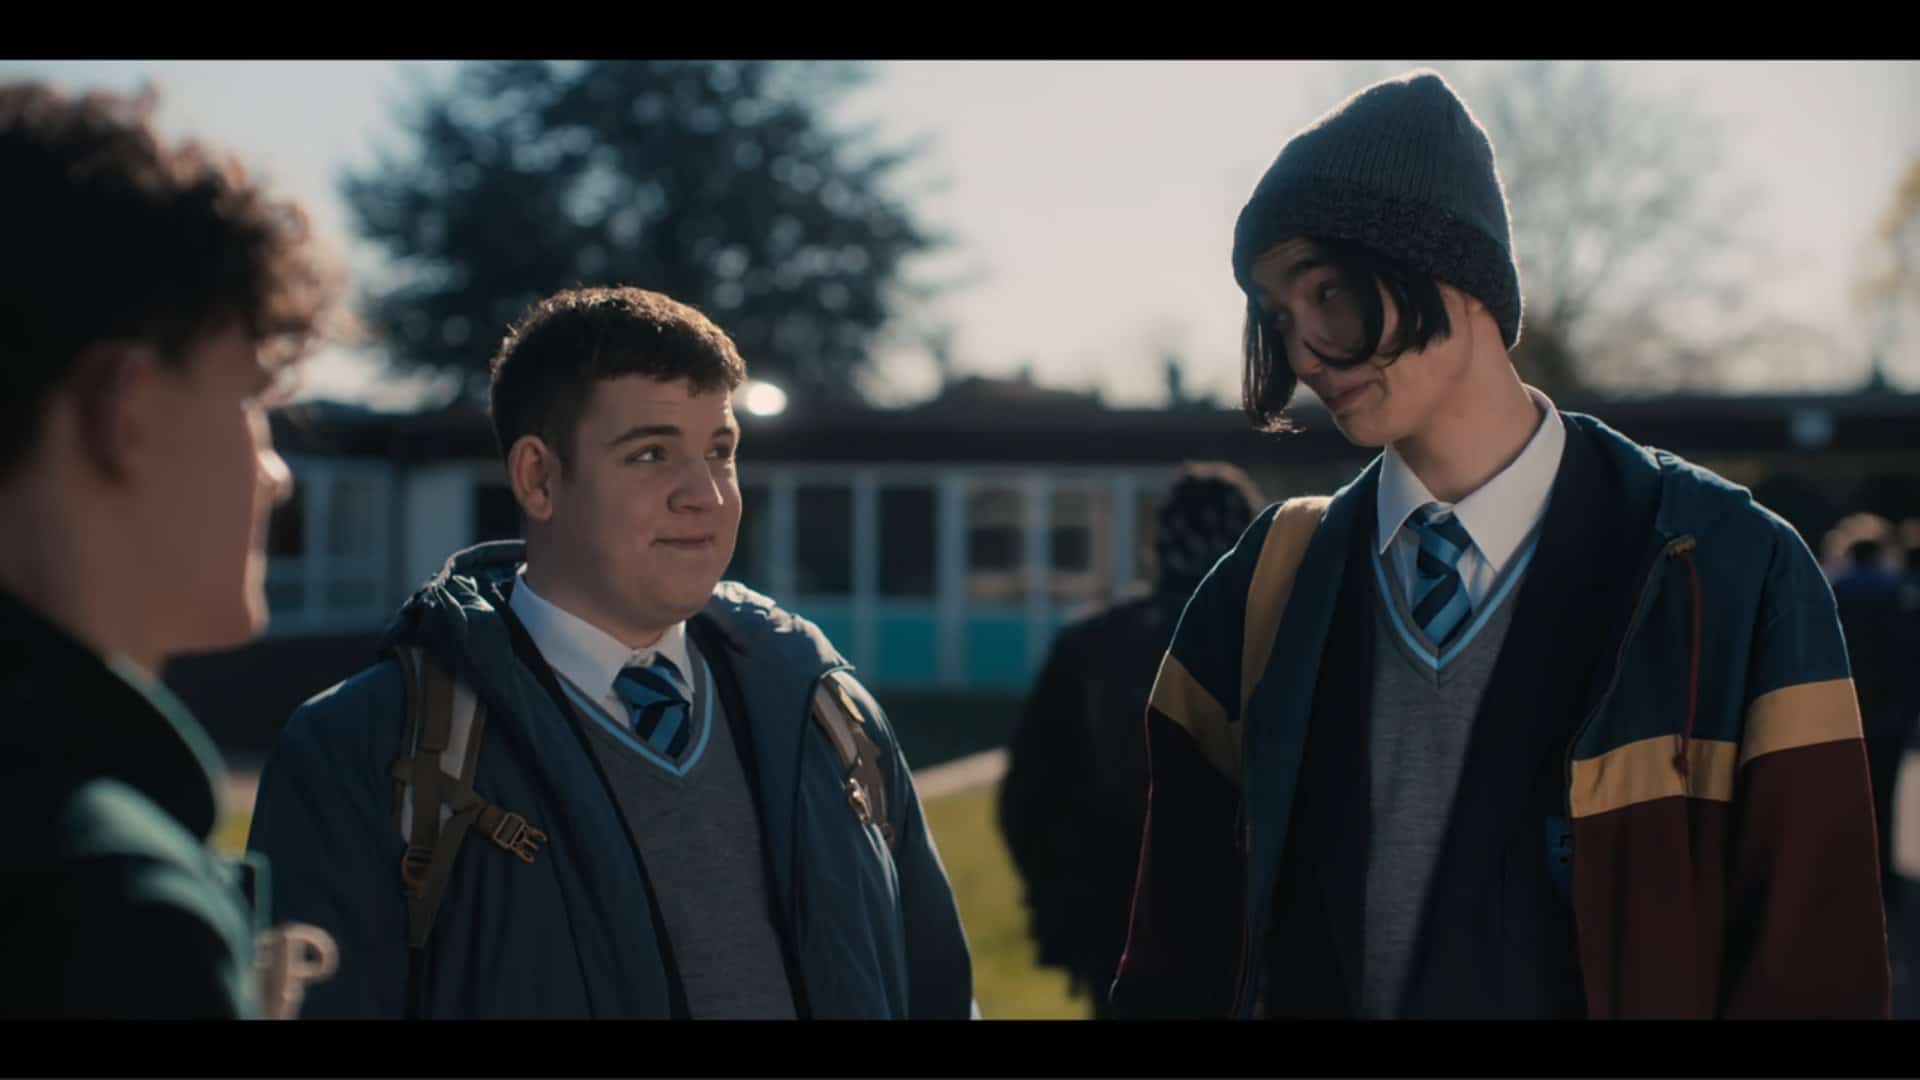 Isaac (Tobie Donovan) and Tao (William Gao) talking to Charlie